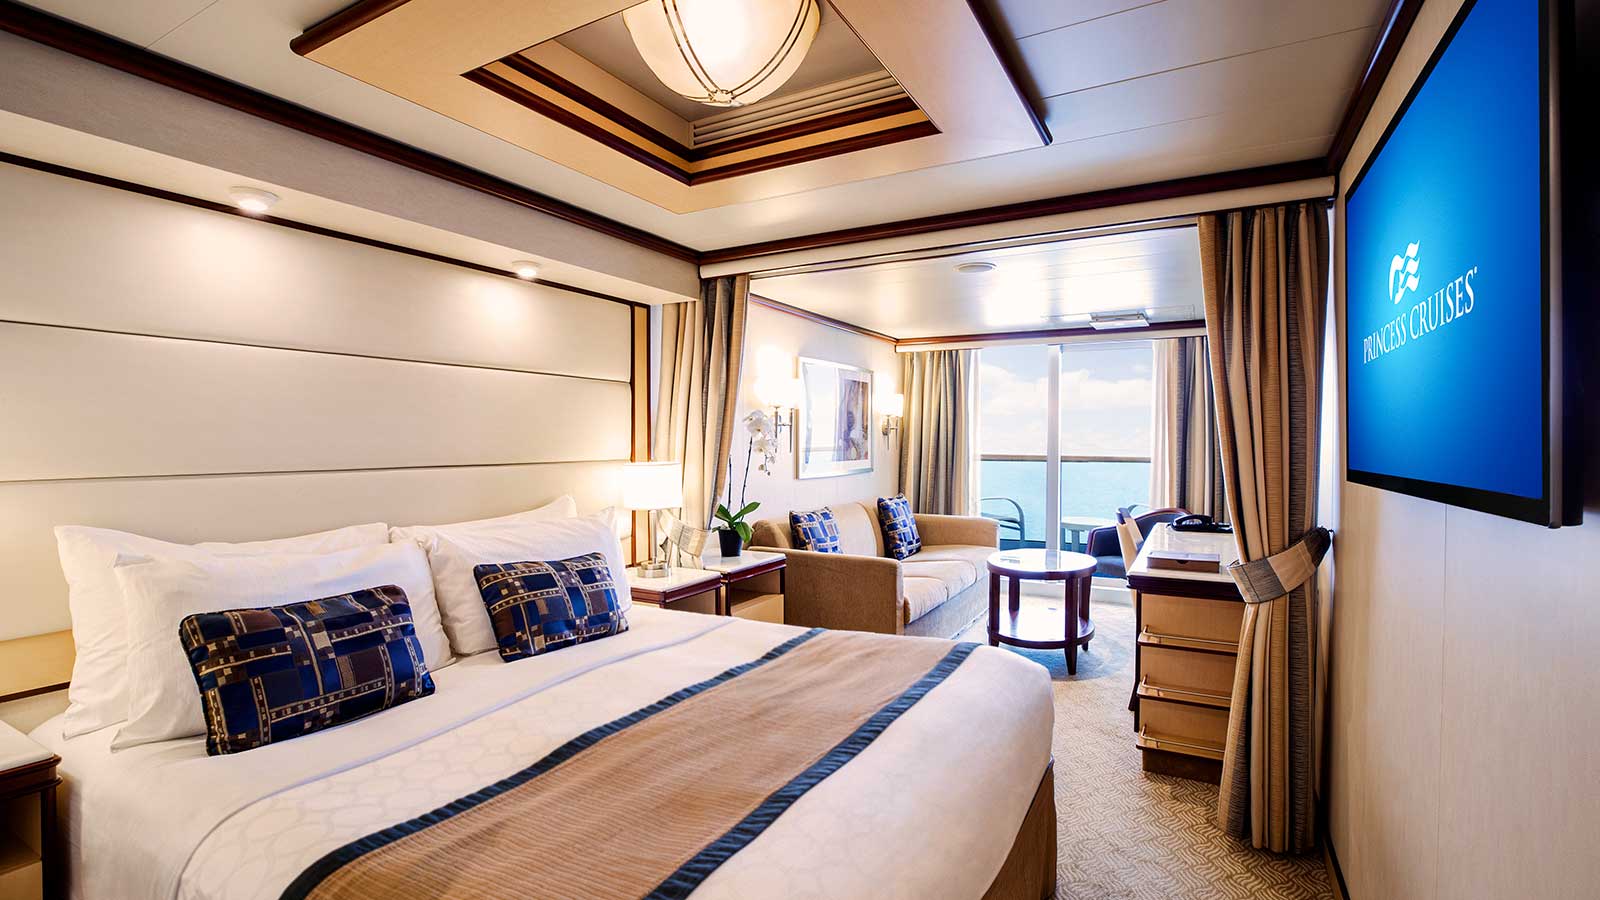 Image of Mini-suite Accommodation, sourced from: Princess Cruise Lines https://www.princess.com/images/global/ships-and-experience/ships/products/staterooms/royal-class-mini-suite-1600.jpg